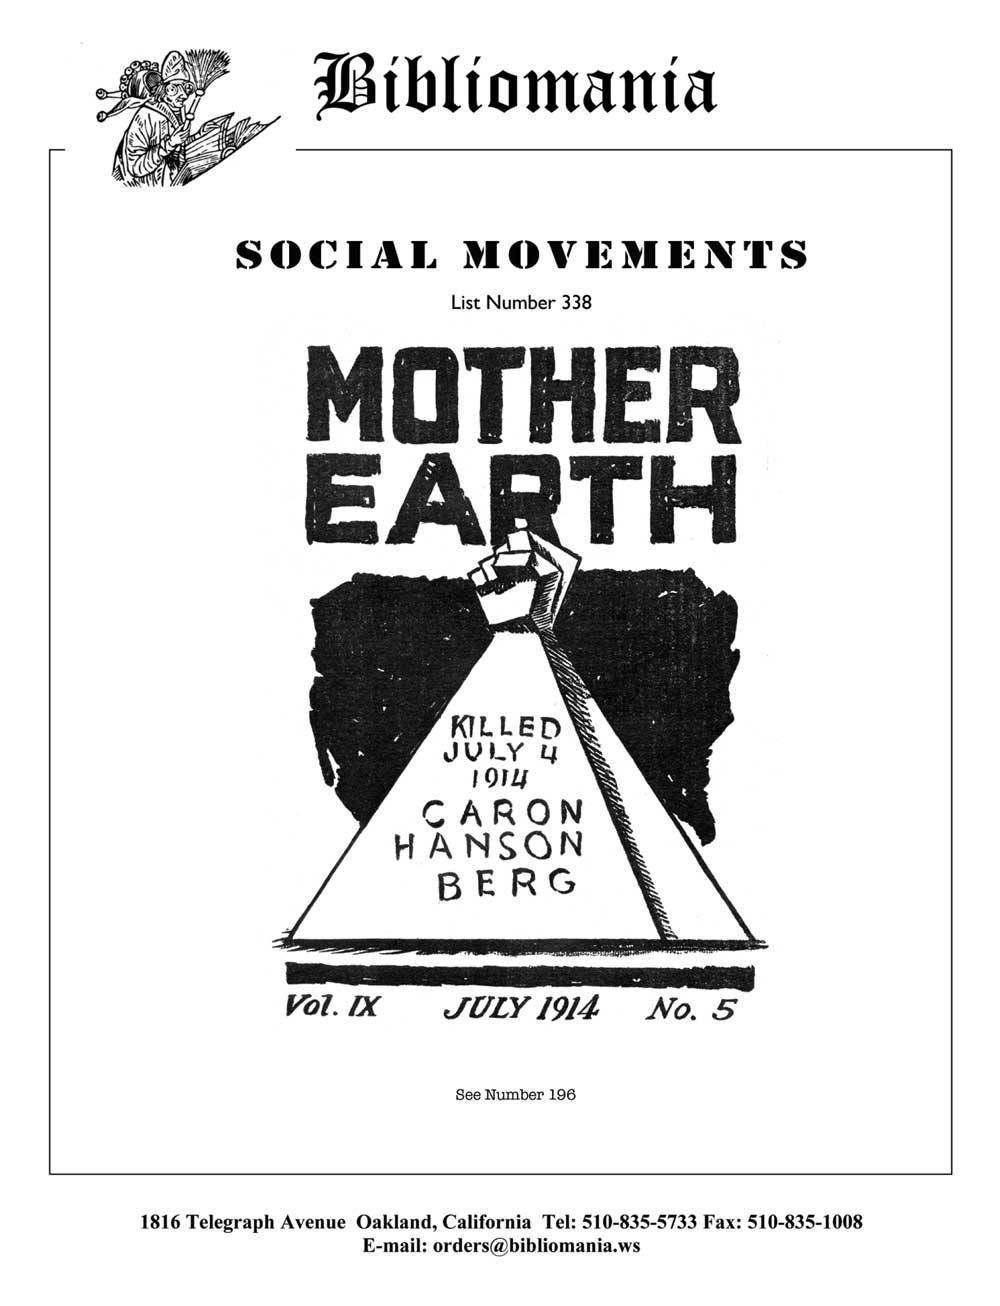 List Number 338 Social Movements